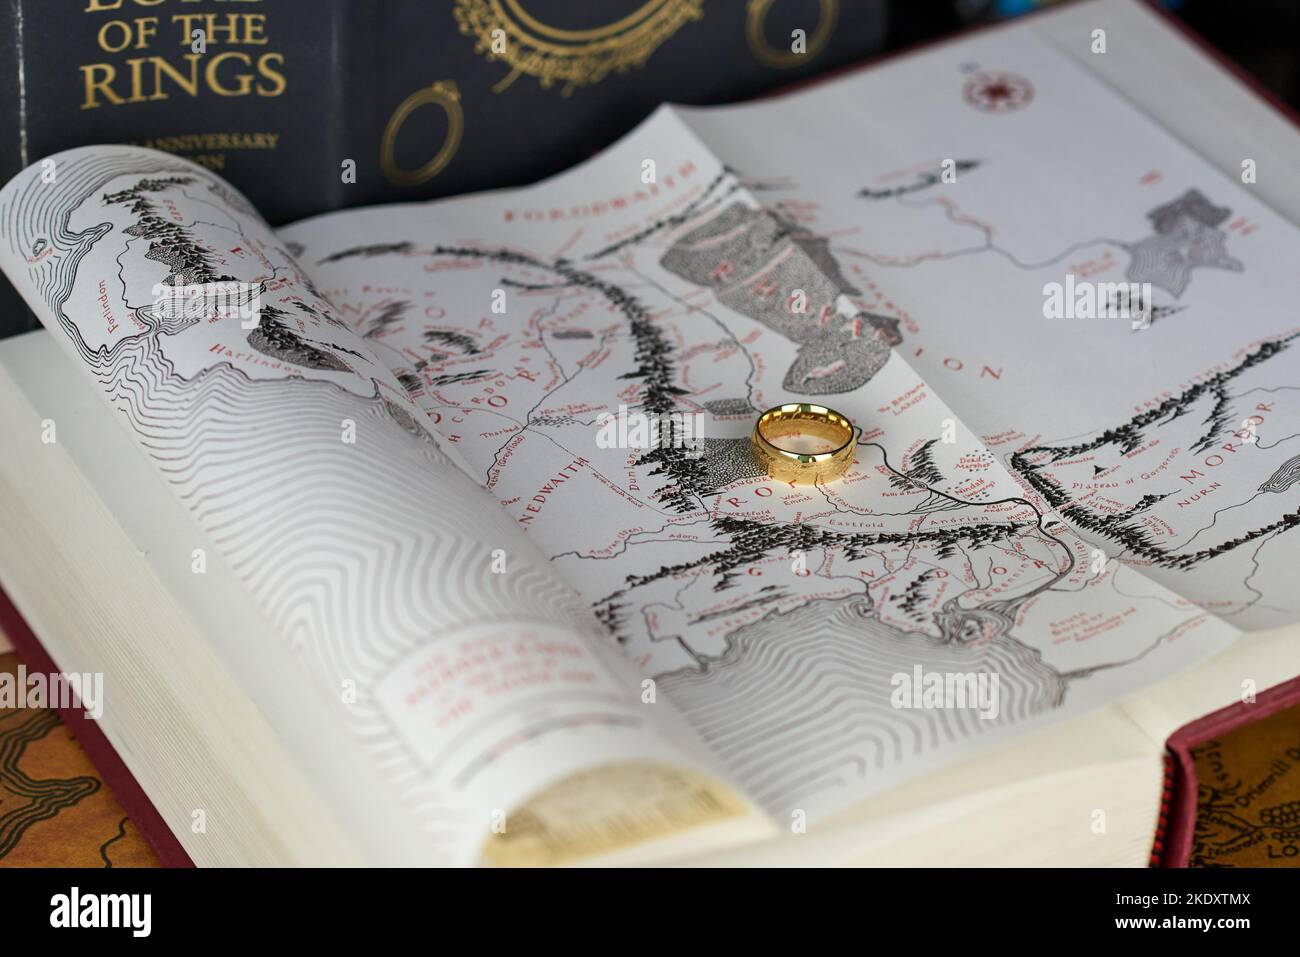 Astrakhan, Russia - 11.09.2022: Golden Ring of Power lies on the map in The Lord of the Rings book Stock Photo